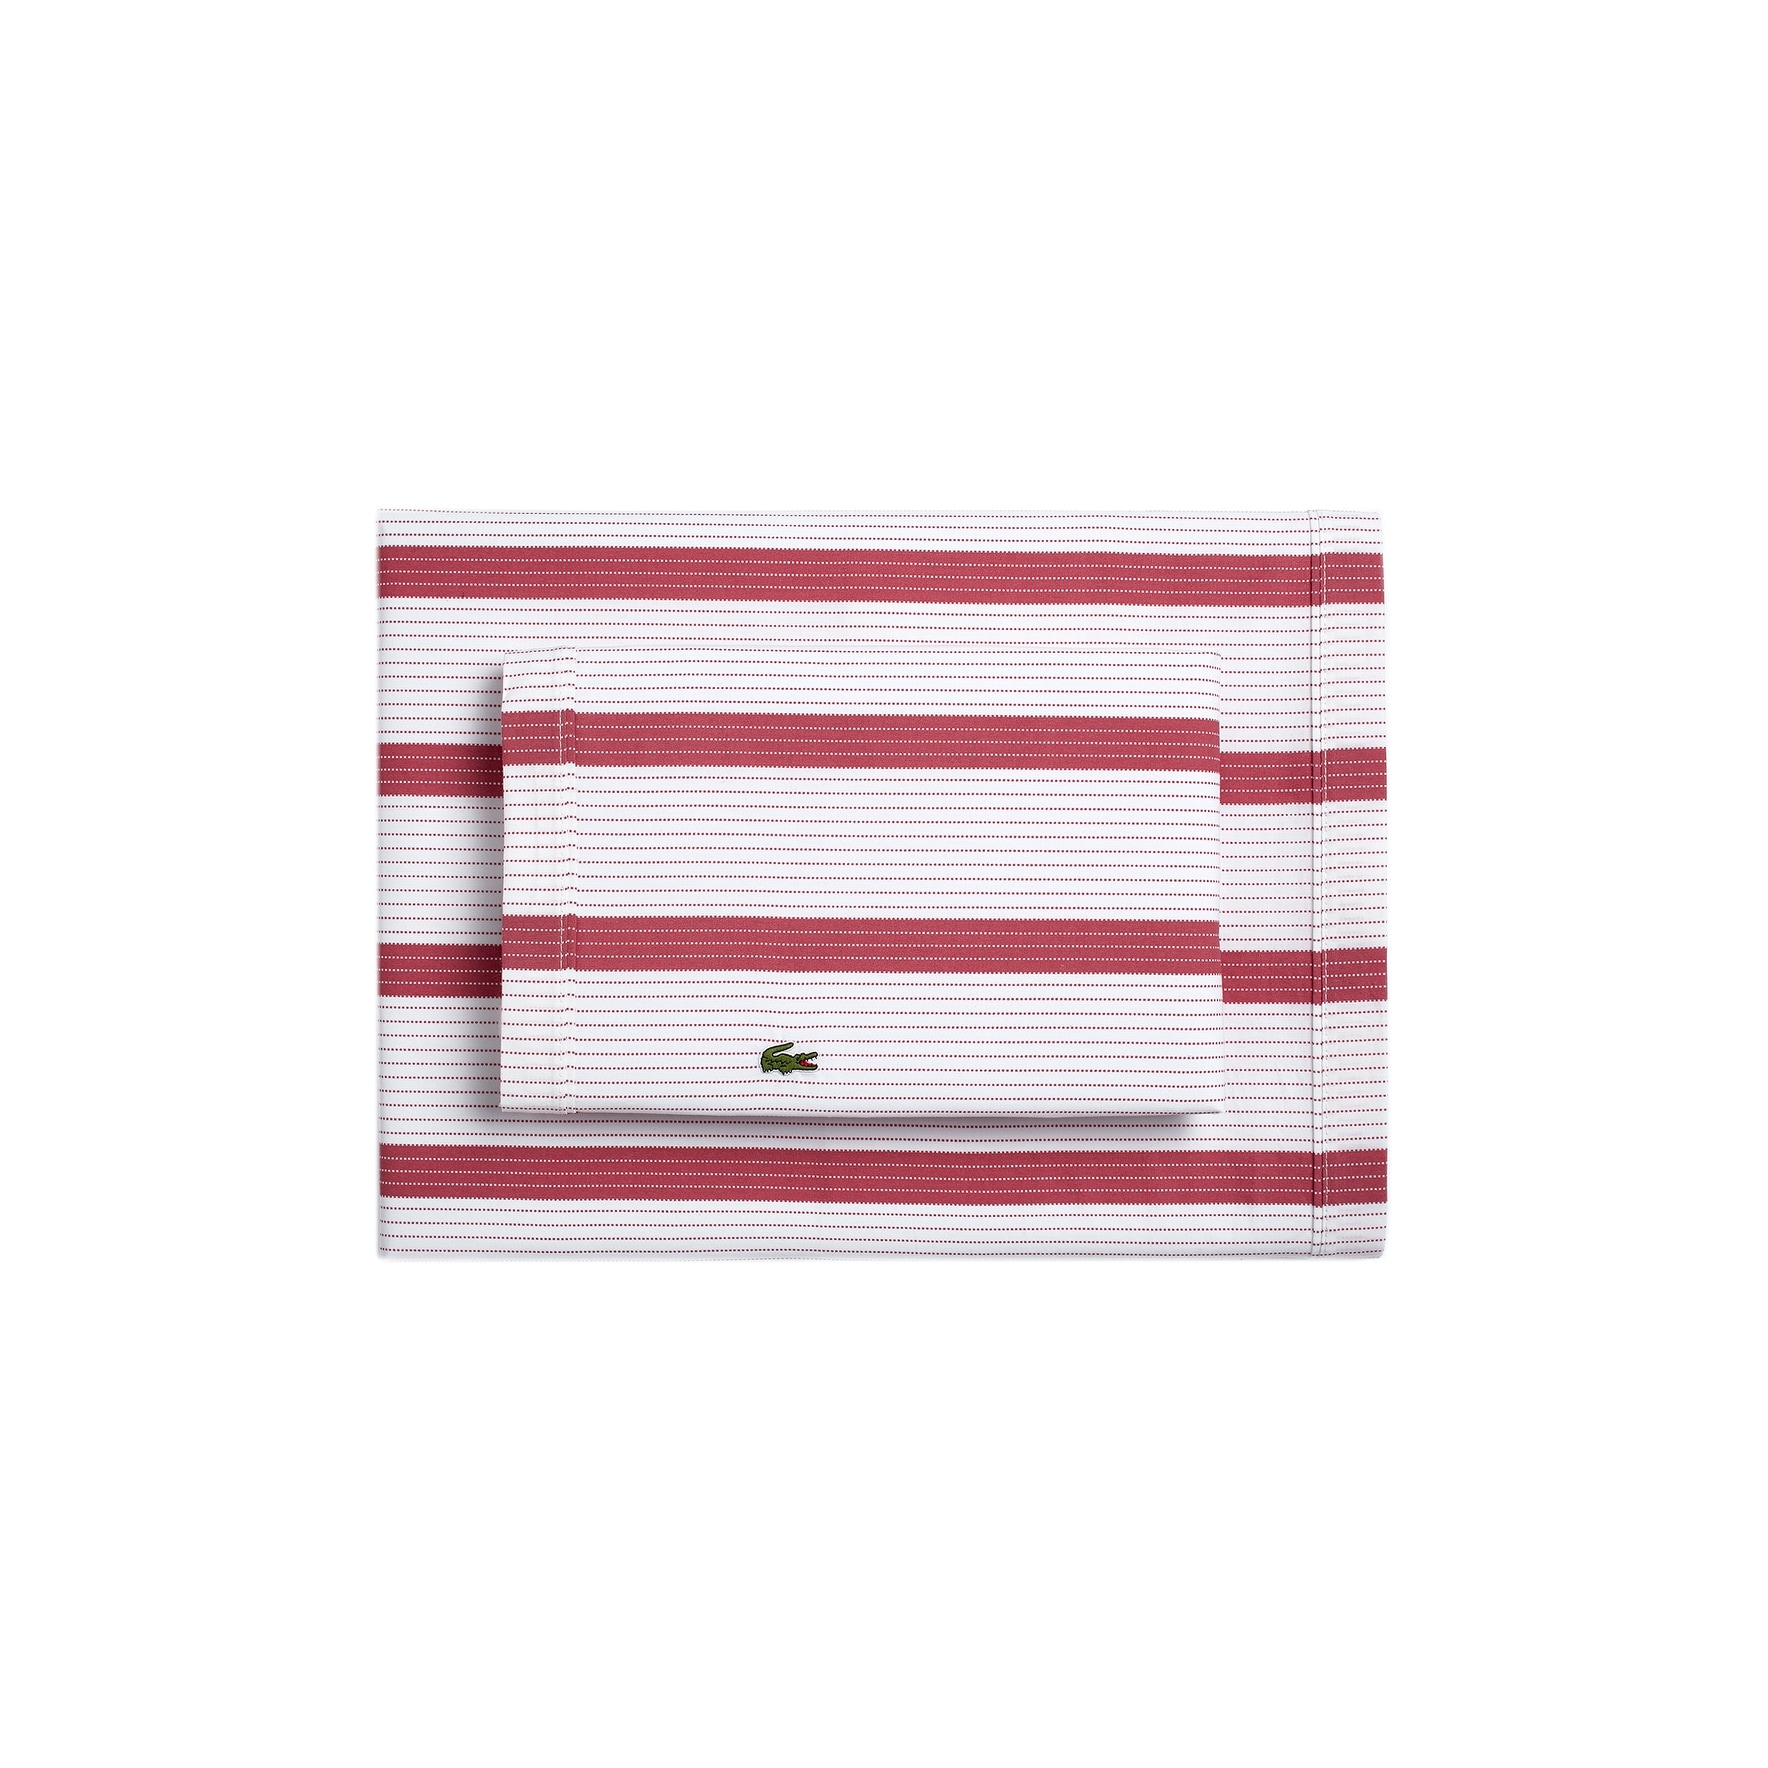 https://ak1.ostkcdn.com/images/products/is/images/direct/7947217d11b22a99782507a028cbd09a193b8ecf/Lacoste-Archive-Striped-100%25-Cotton-Sheet-Set.jpg